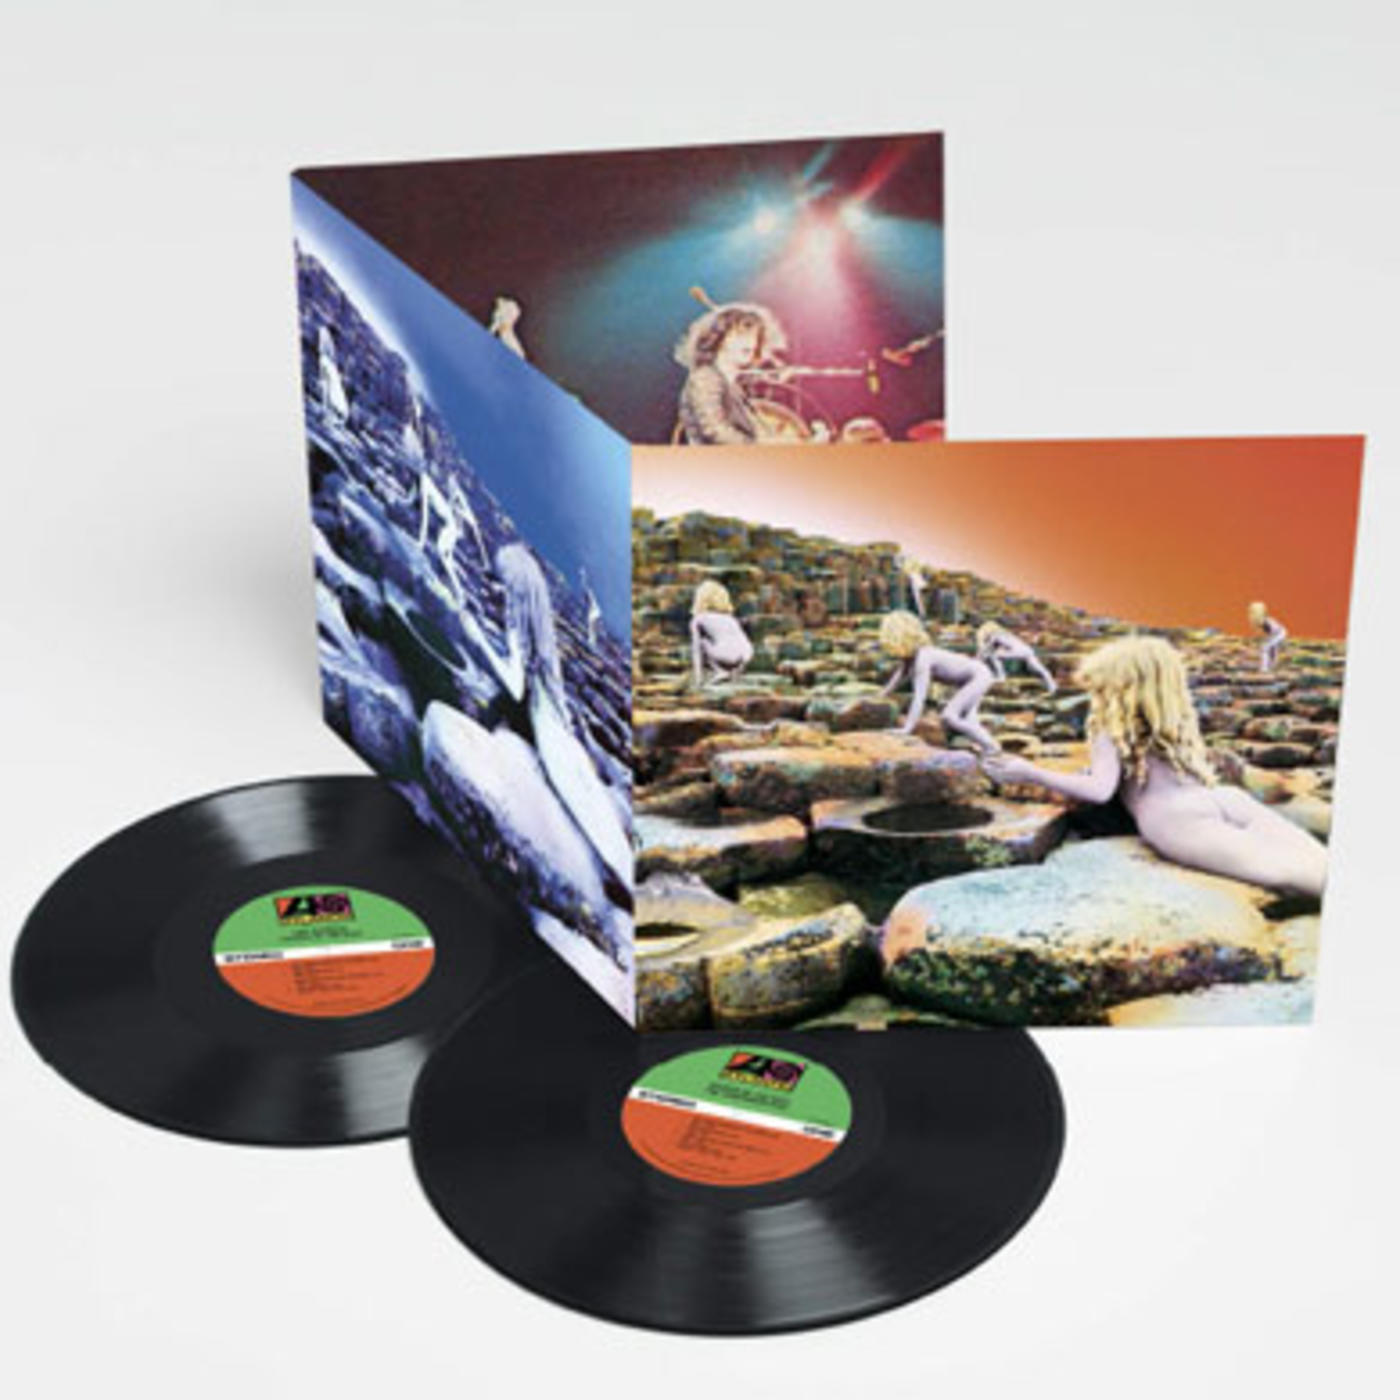 Houses of the Holy - Deluxe Edition Vinyl